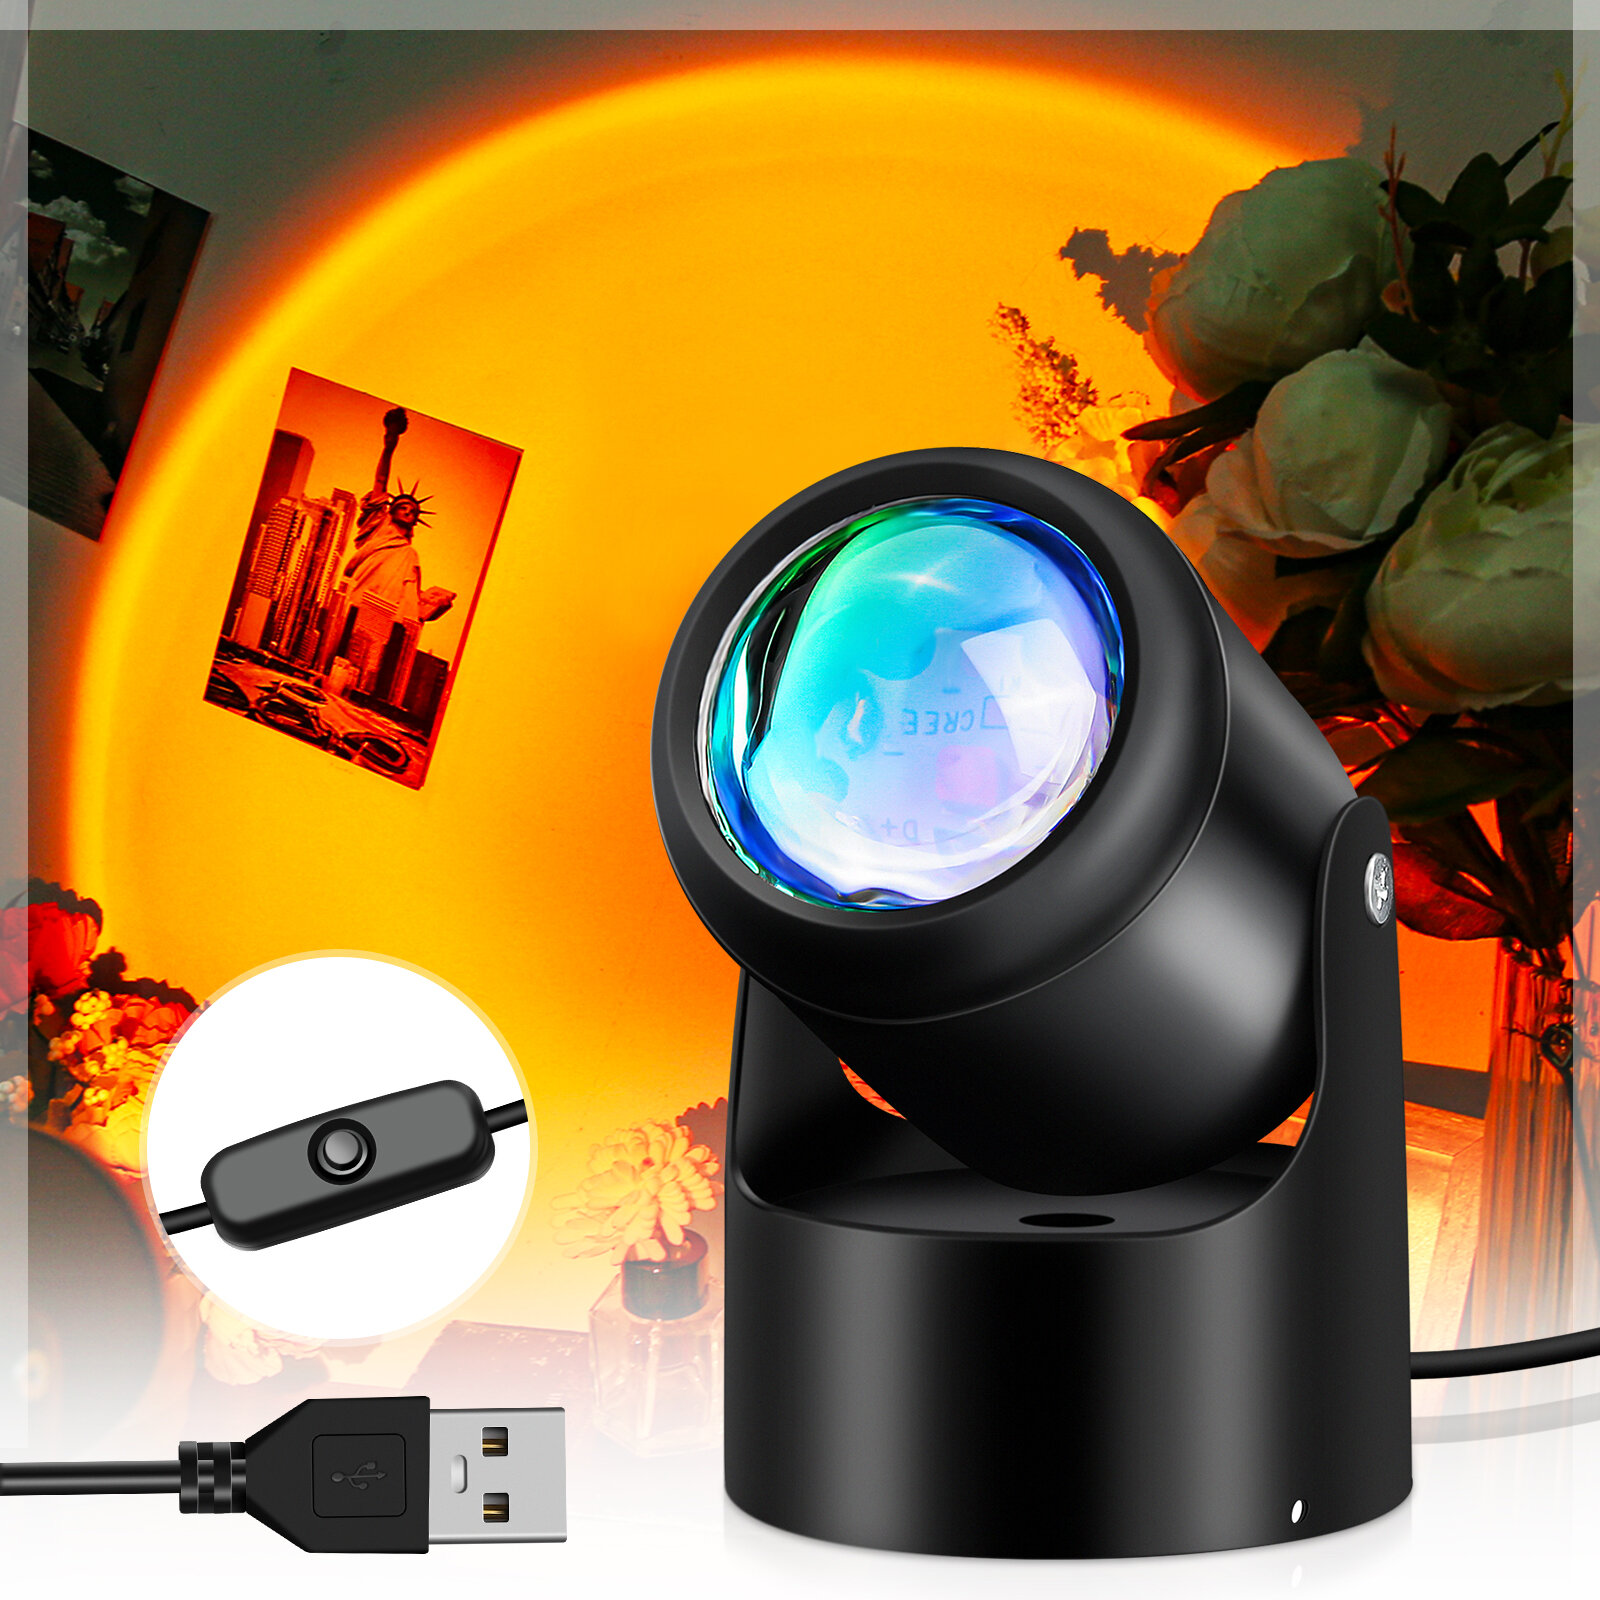 best price,charminer,rotation,sunset,projection,led,light,eu,discount